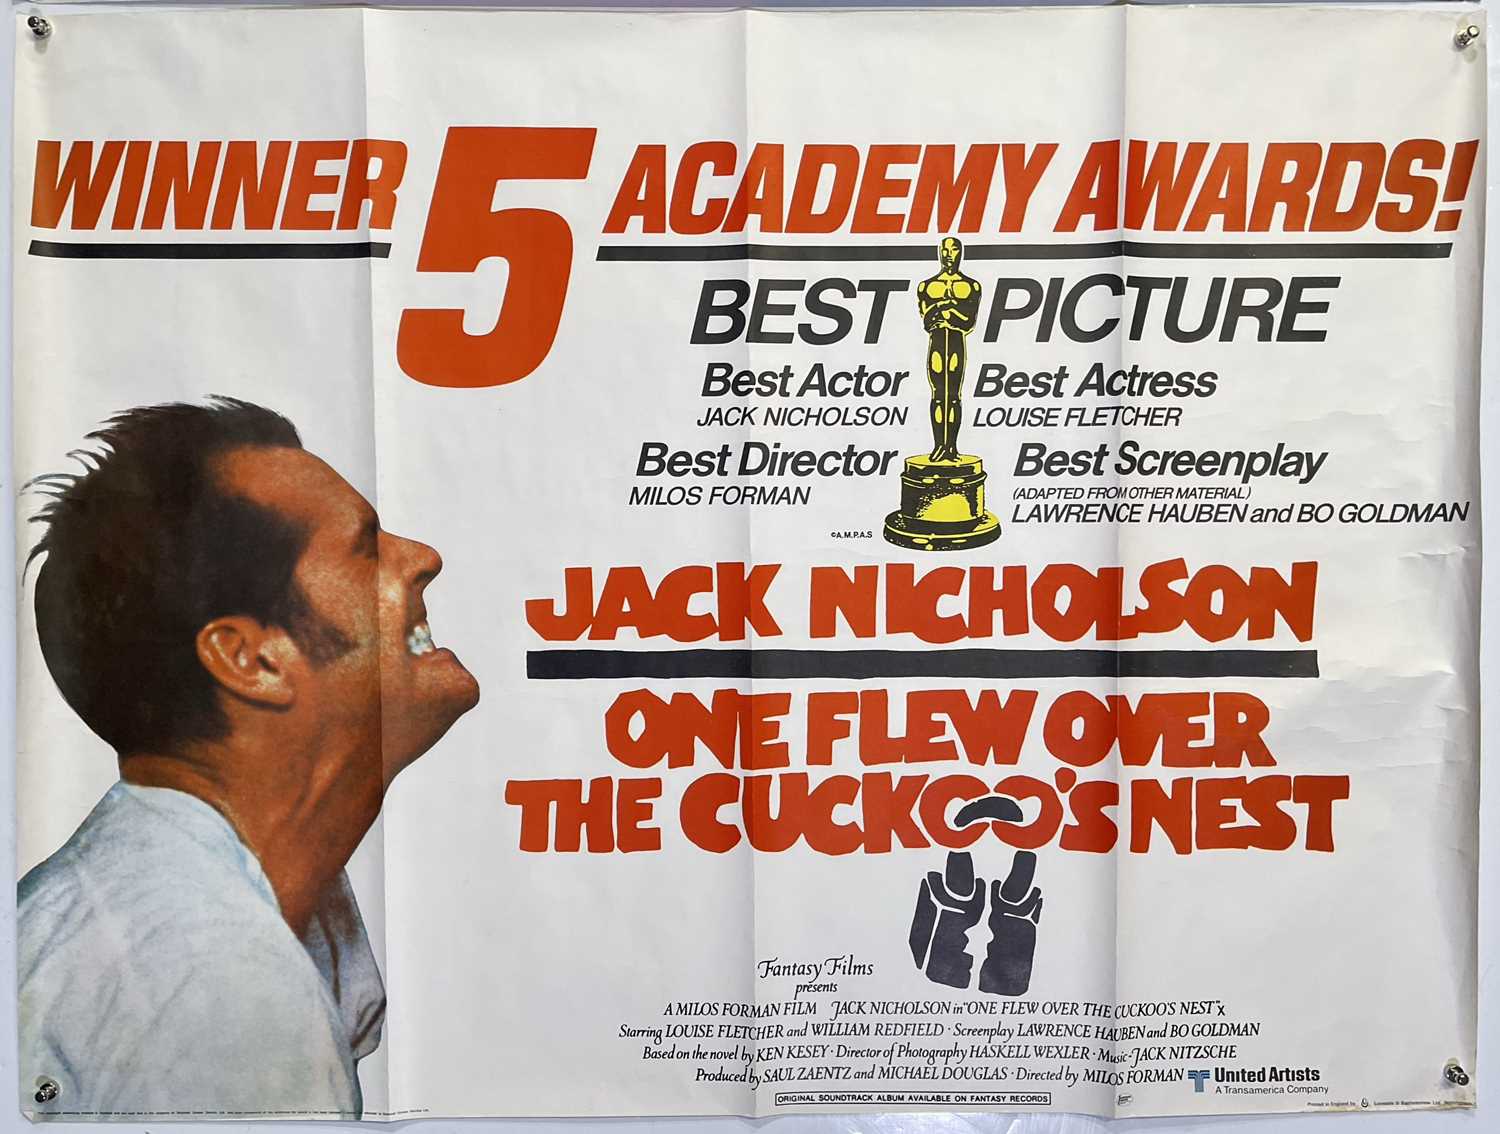 CINEMA POSTERS - ONE FLEW OVER THE CUCKOO'S NEST (1975) / TAXI DRIVER DOUBLE BILL. - Image 3 of 3